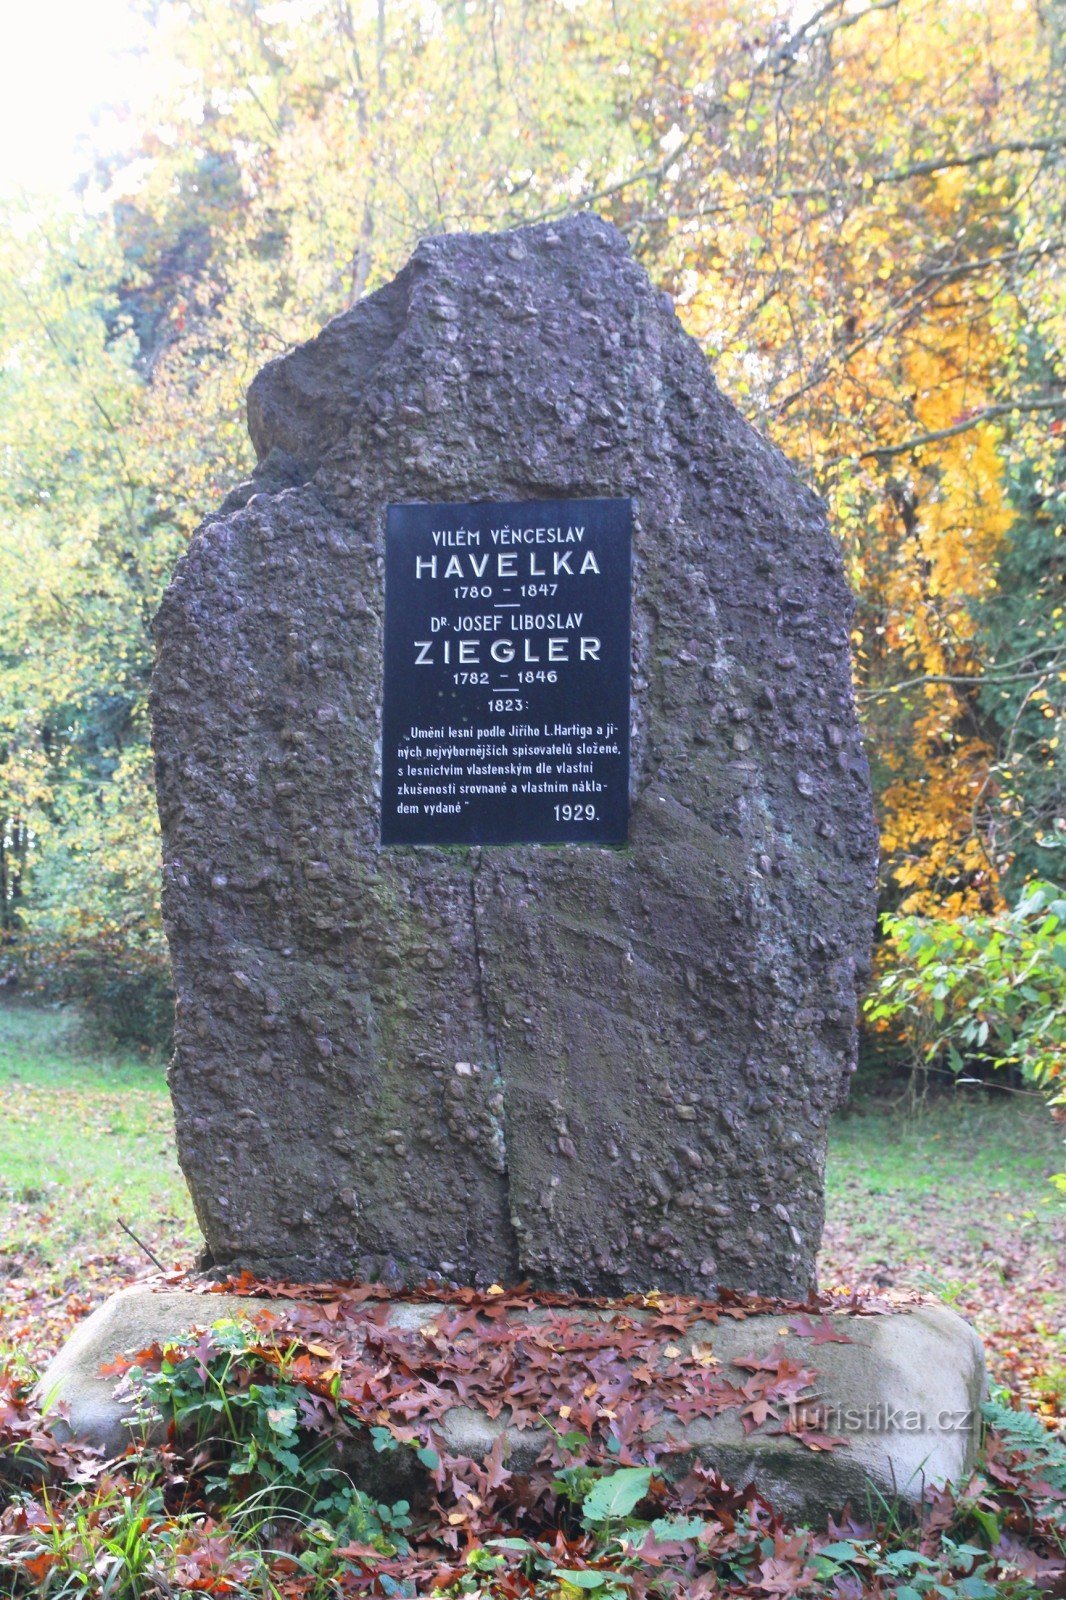 Monument to VV Havelka and JL Ziegler